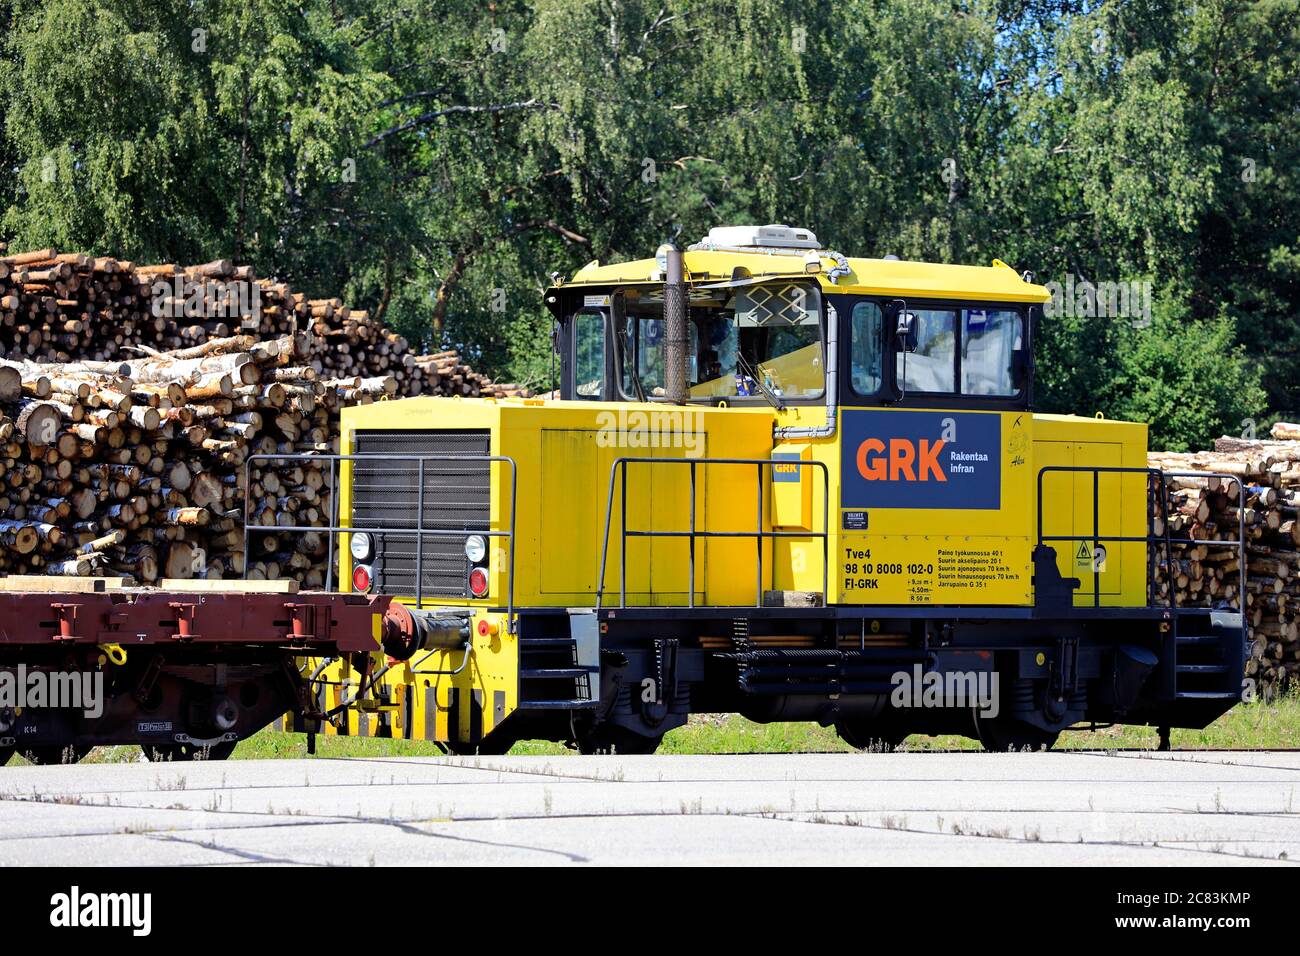 Yellow Tve4 OTM work locomotive. 40 Tve4 were manufactured by Valmet in 1978-83, numbered 501–540. Salo Railway Station, Finland. July 18, 2020. Stock Photo